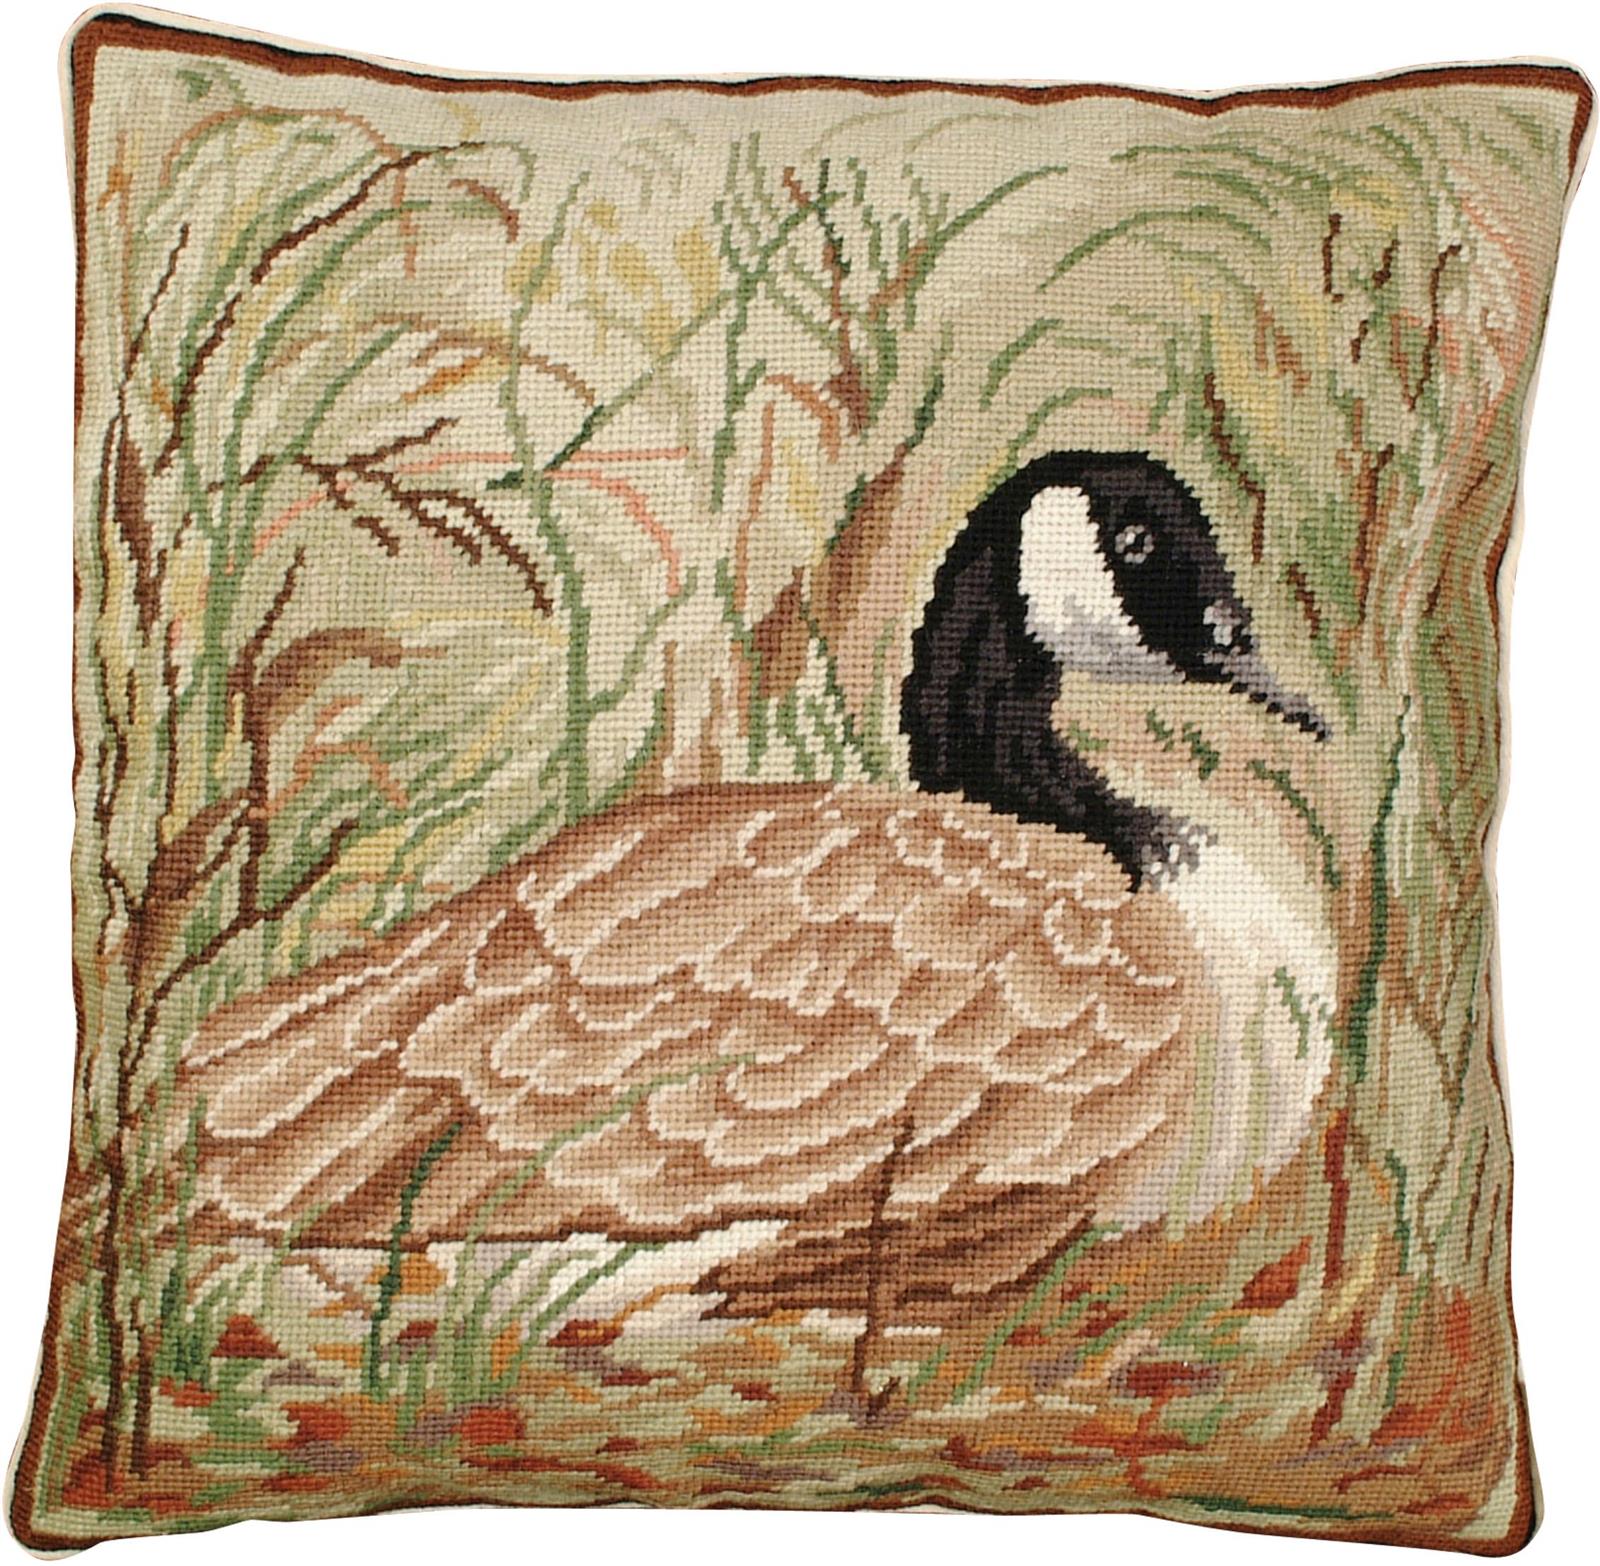 Throw Pillow Needlepoint Canada Goose 18x18 Warm Tones Beige Multi-Color Wool-Image 1